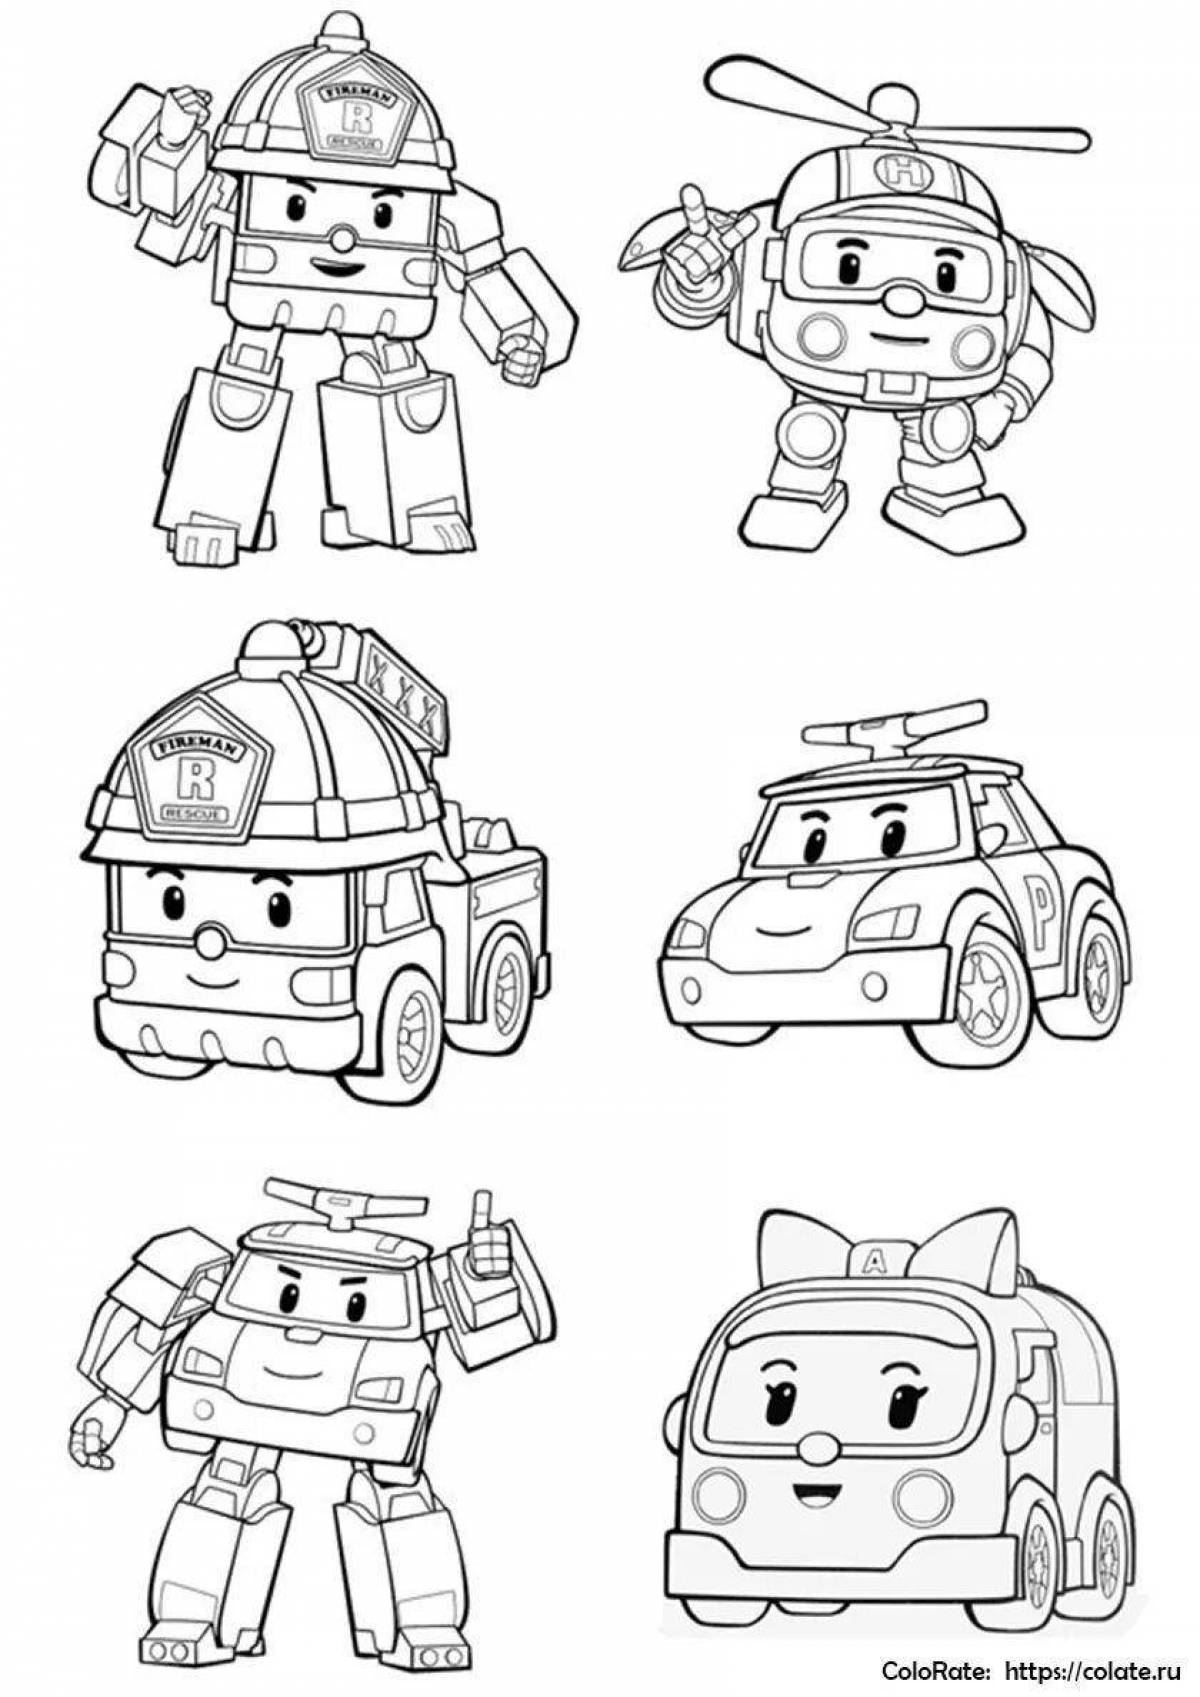 Poly robocar incredible fire truck coloring page